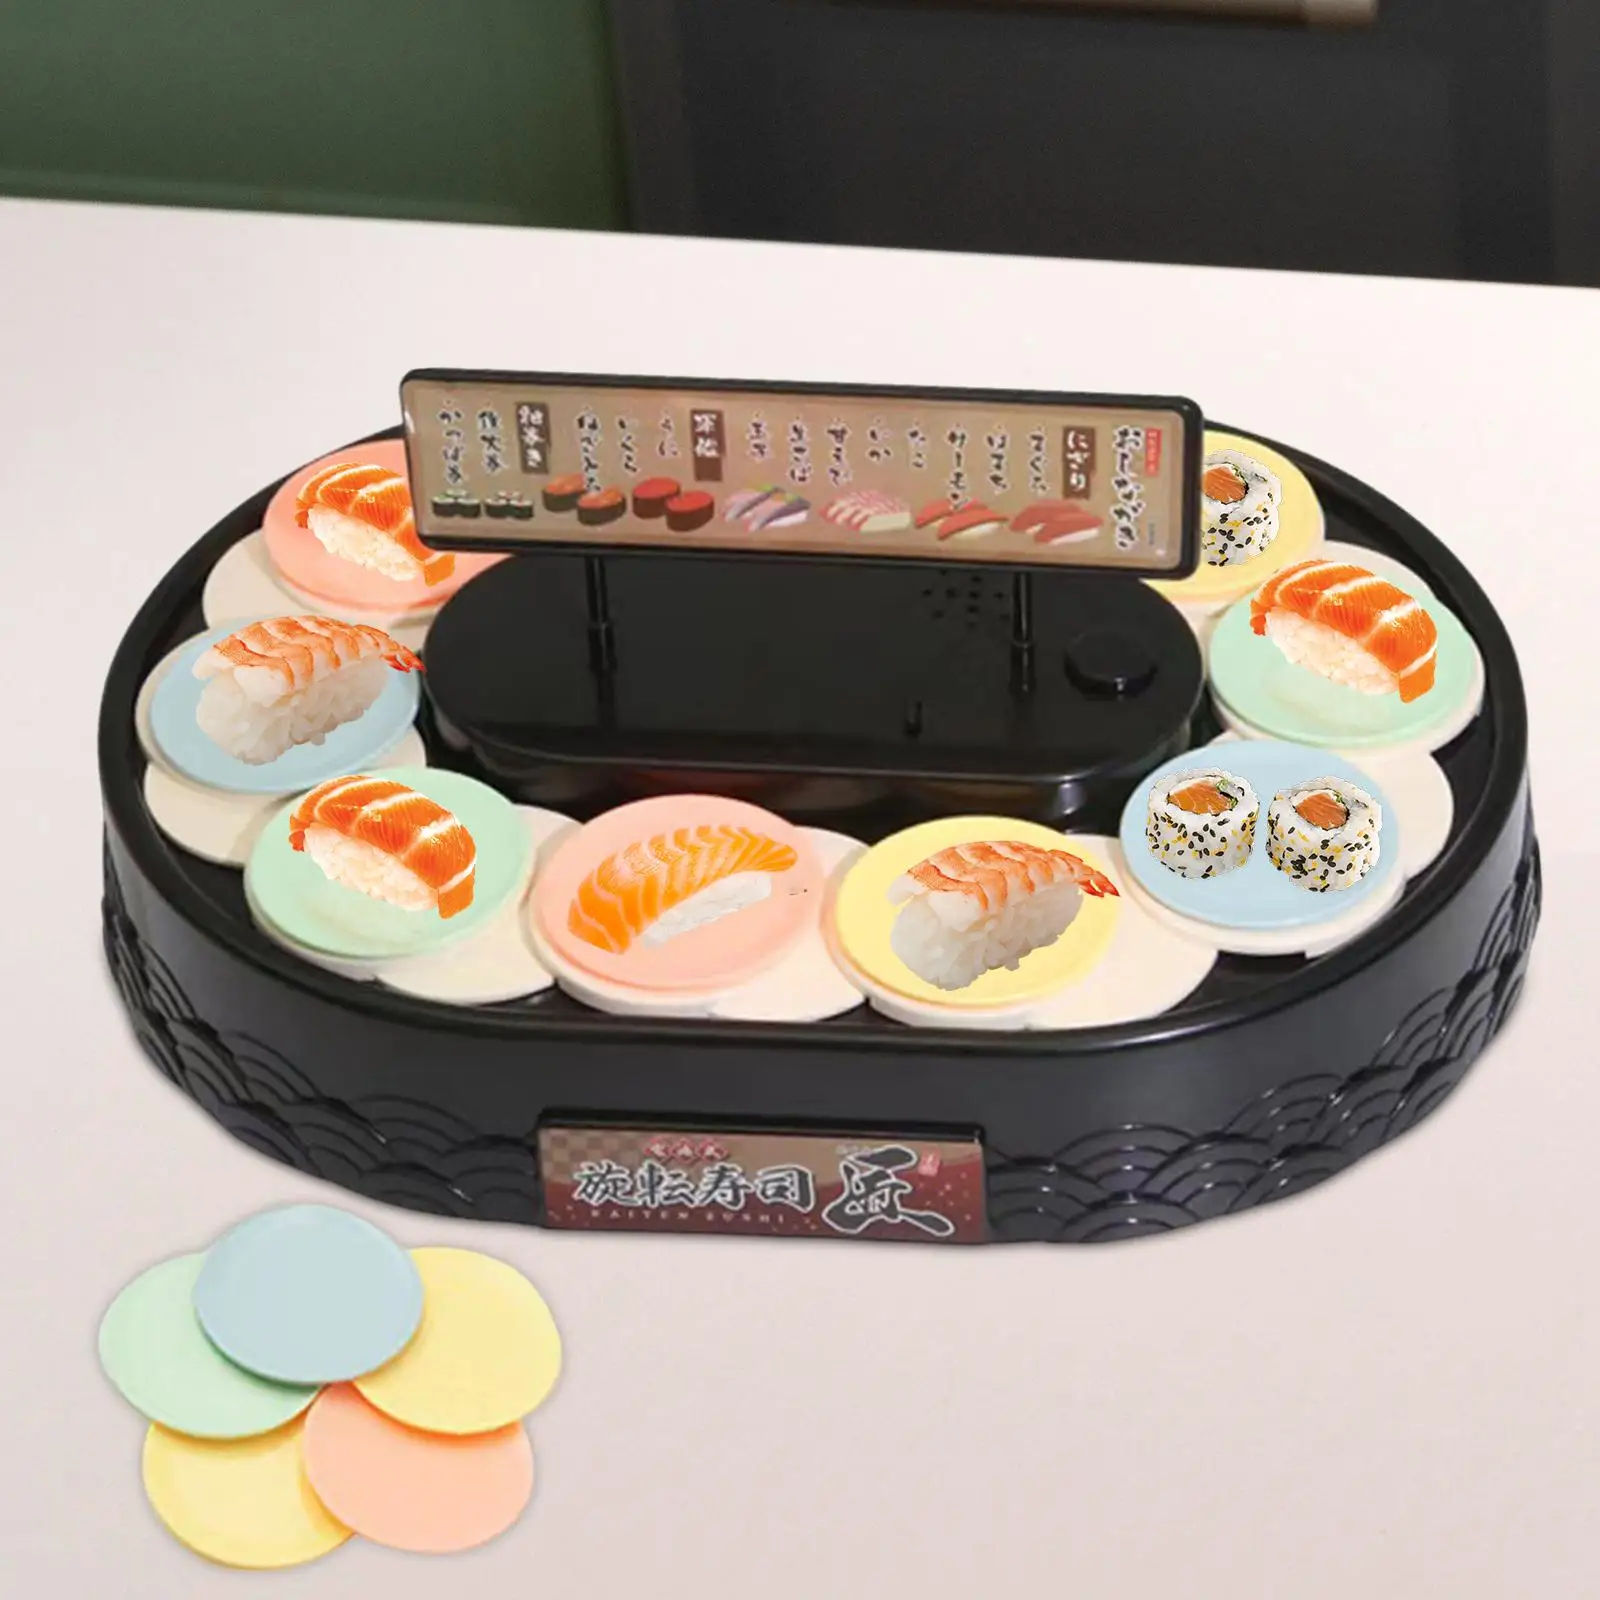 Sushi Machine Electric with Serving Trays Rotating Cupcake Display Stand Turntable for Jewelry Sushi Desserts Cupcakes Festival